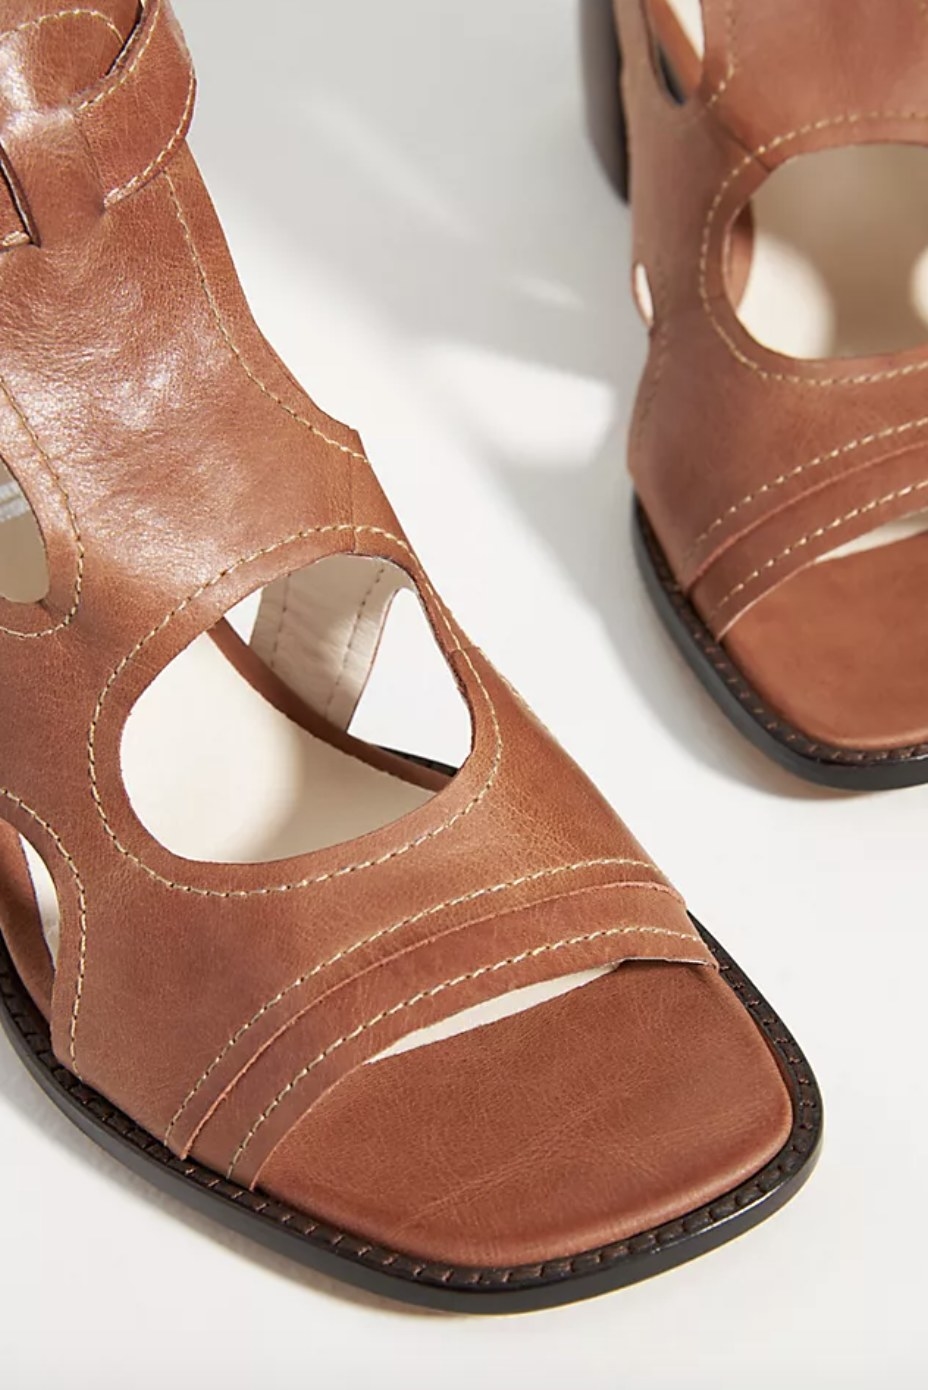 The brown leather sandals have white stitching and open cutouts